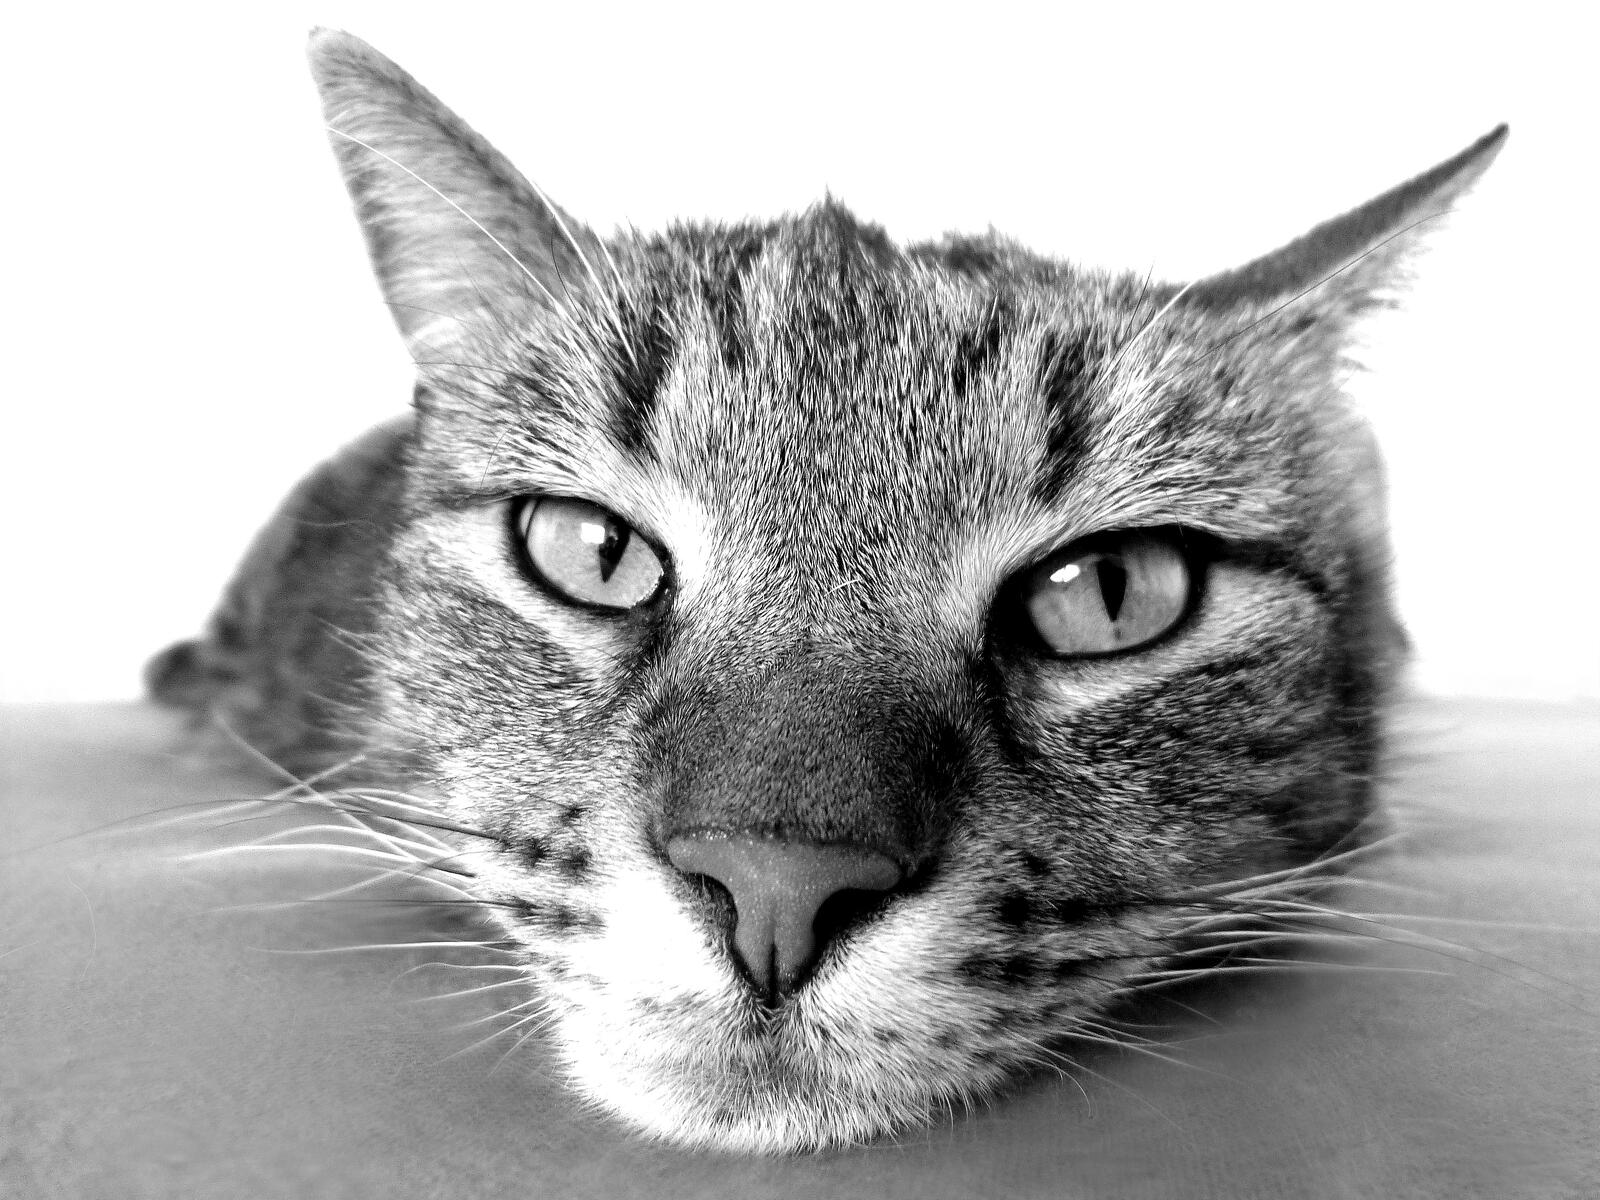 Free photo The cat`s face in the monochrome photo